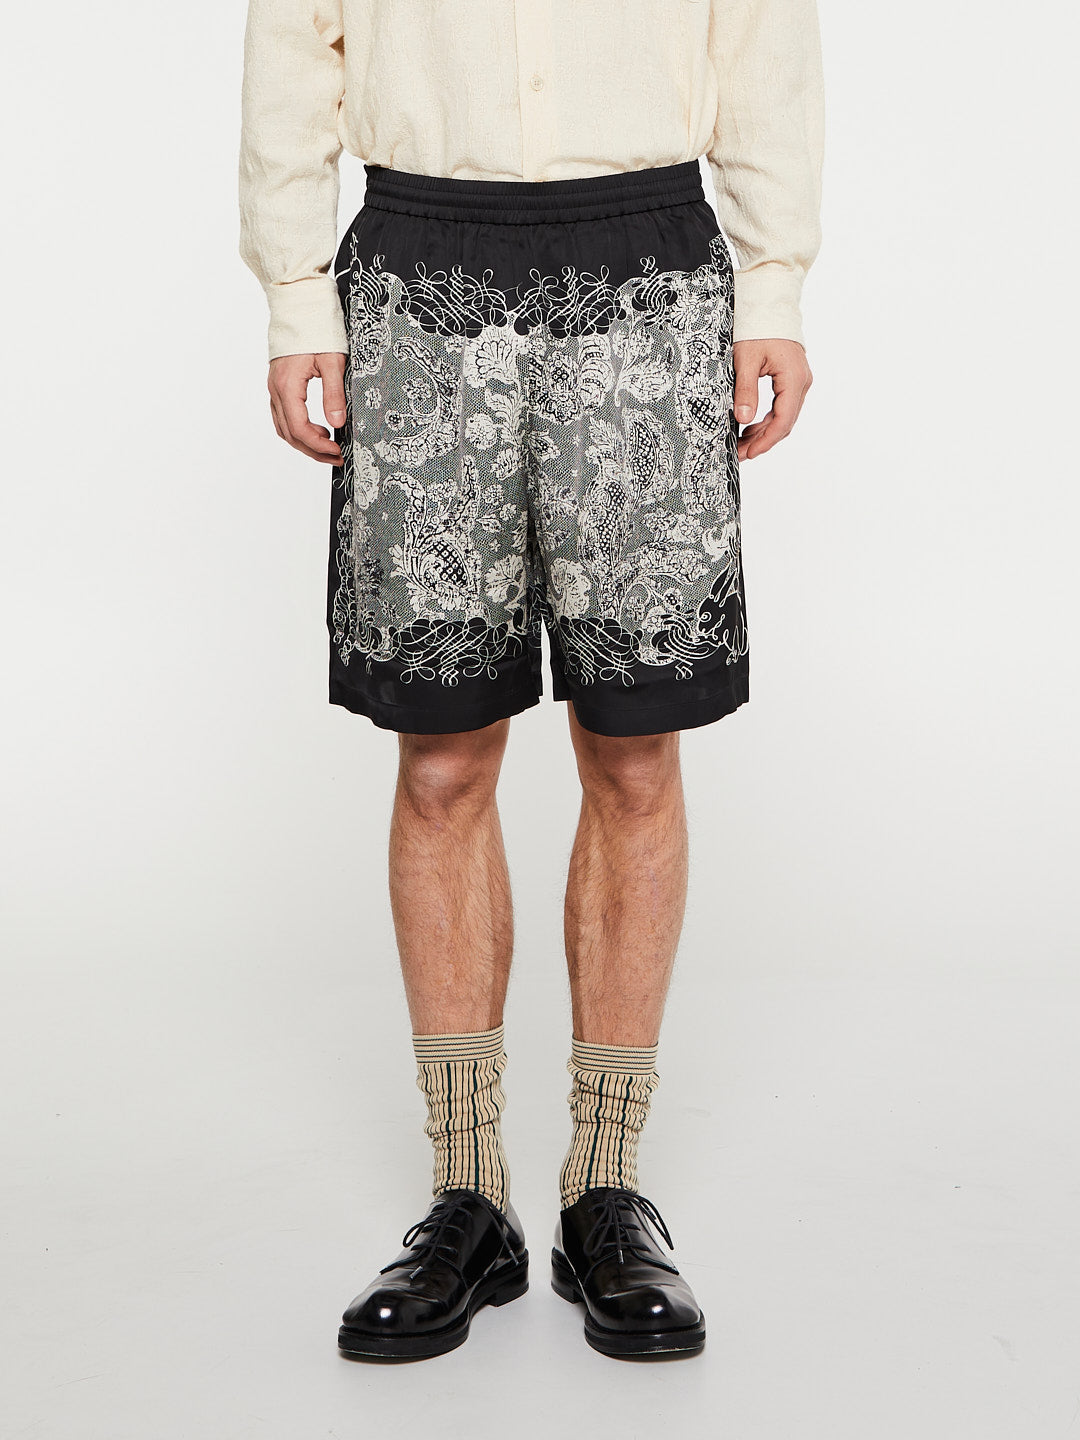 Acne Studios - Shorts in Black and White